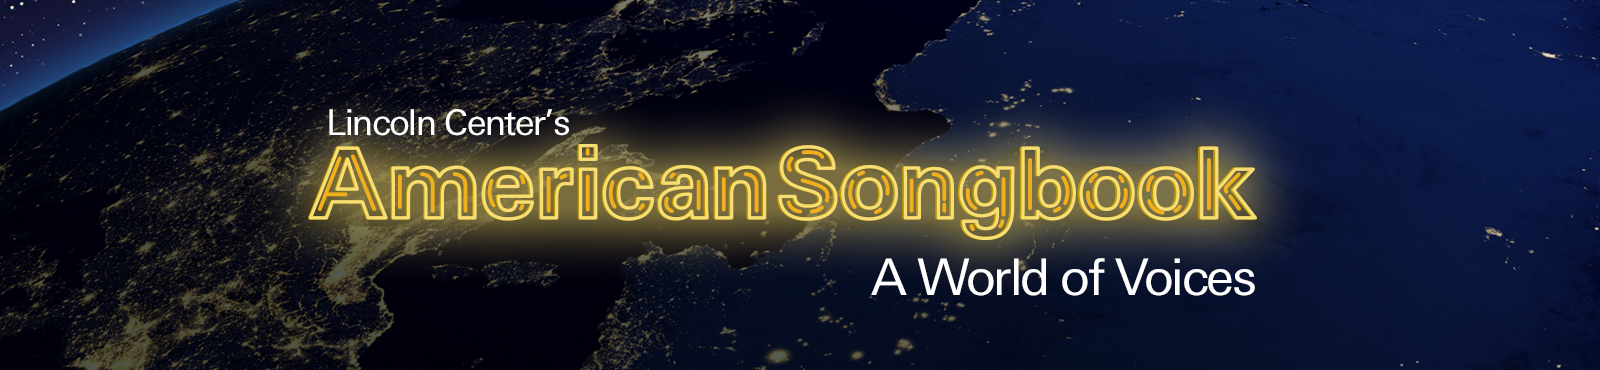 American Songbook: A World of Voices